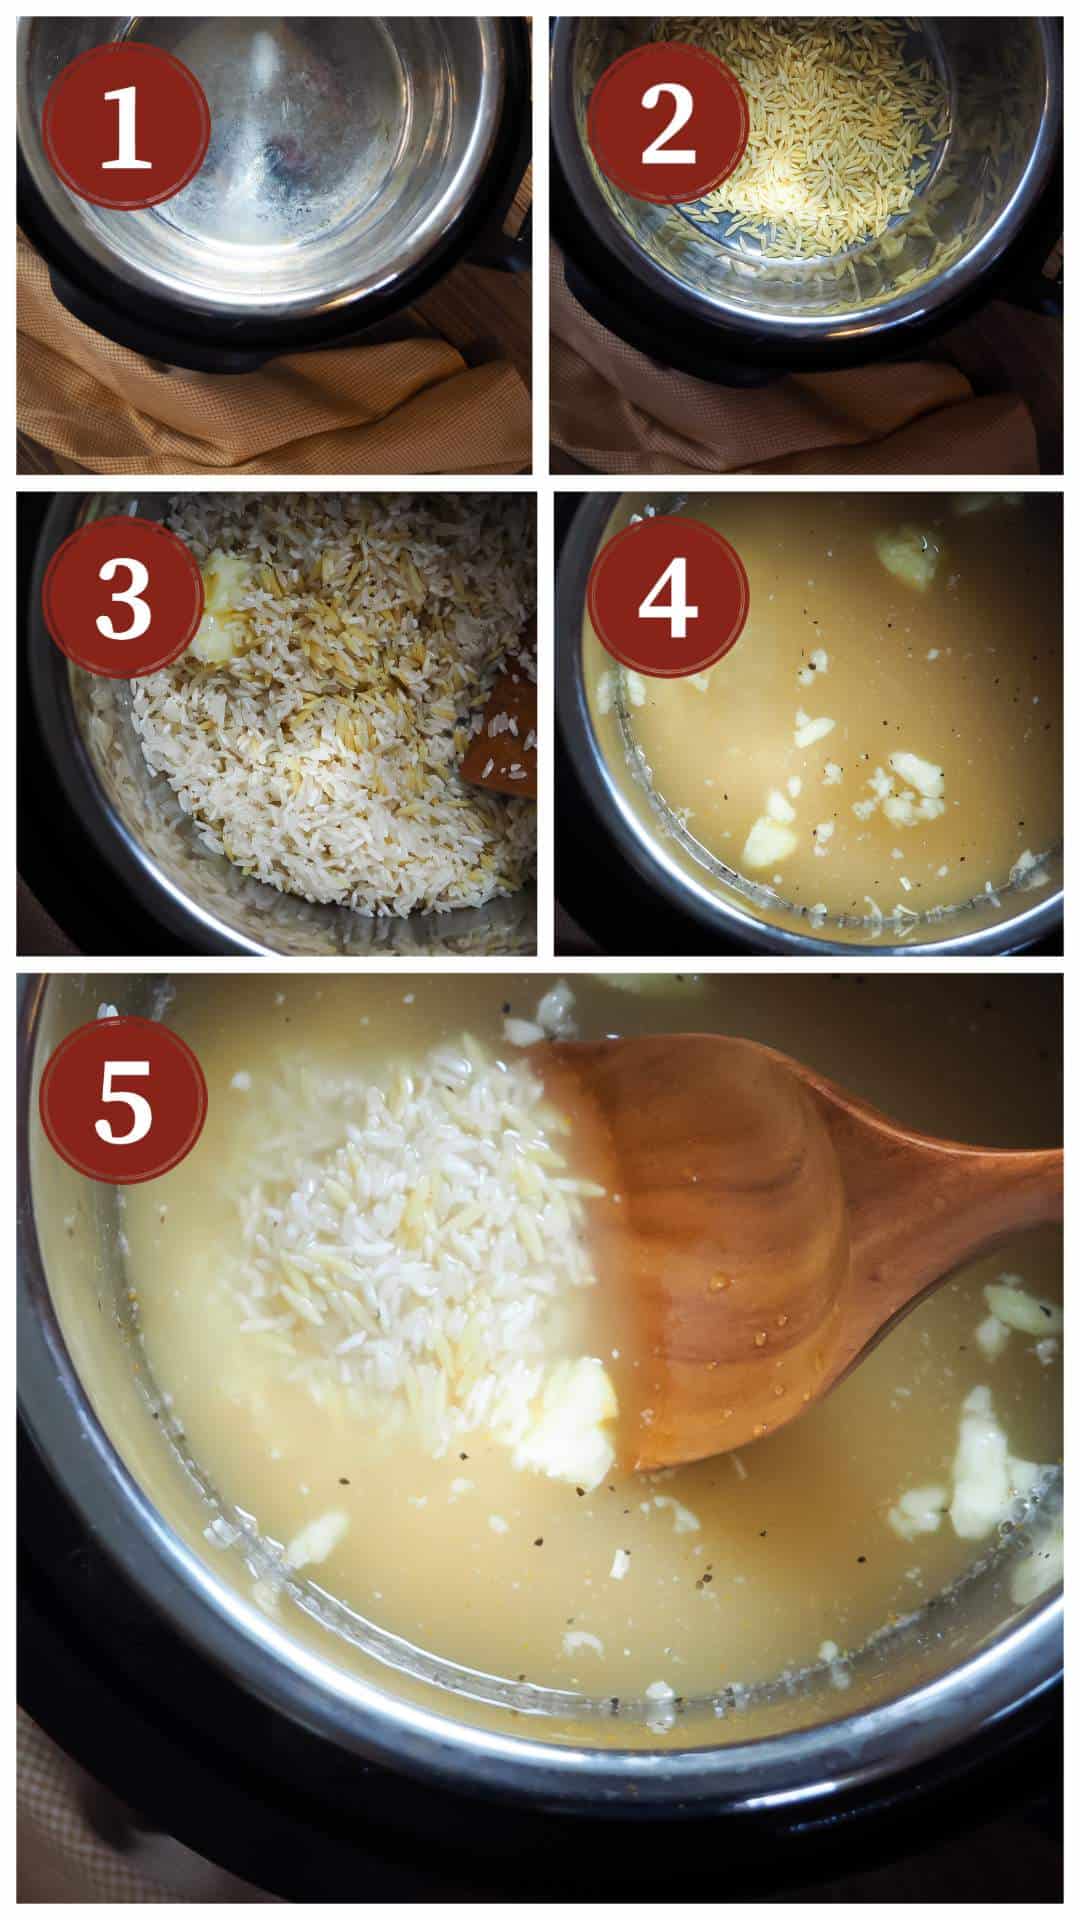 A collage of photos showing the process of making rice pilaf in an instant pot, steps 1 - 5.